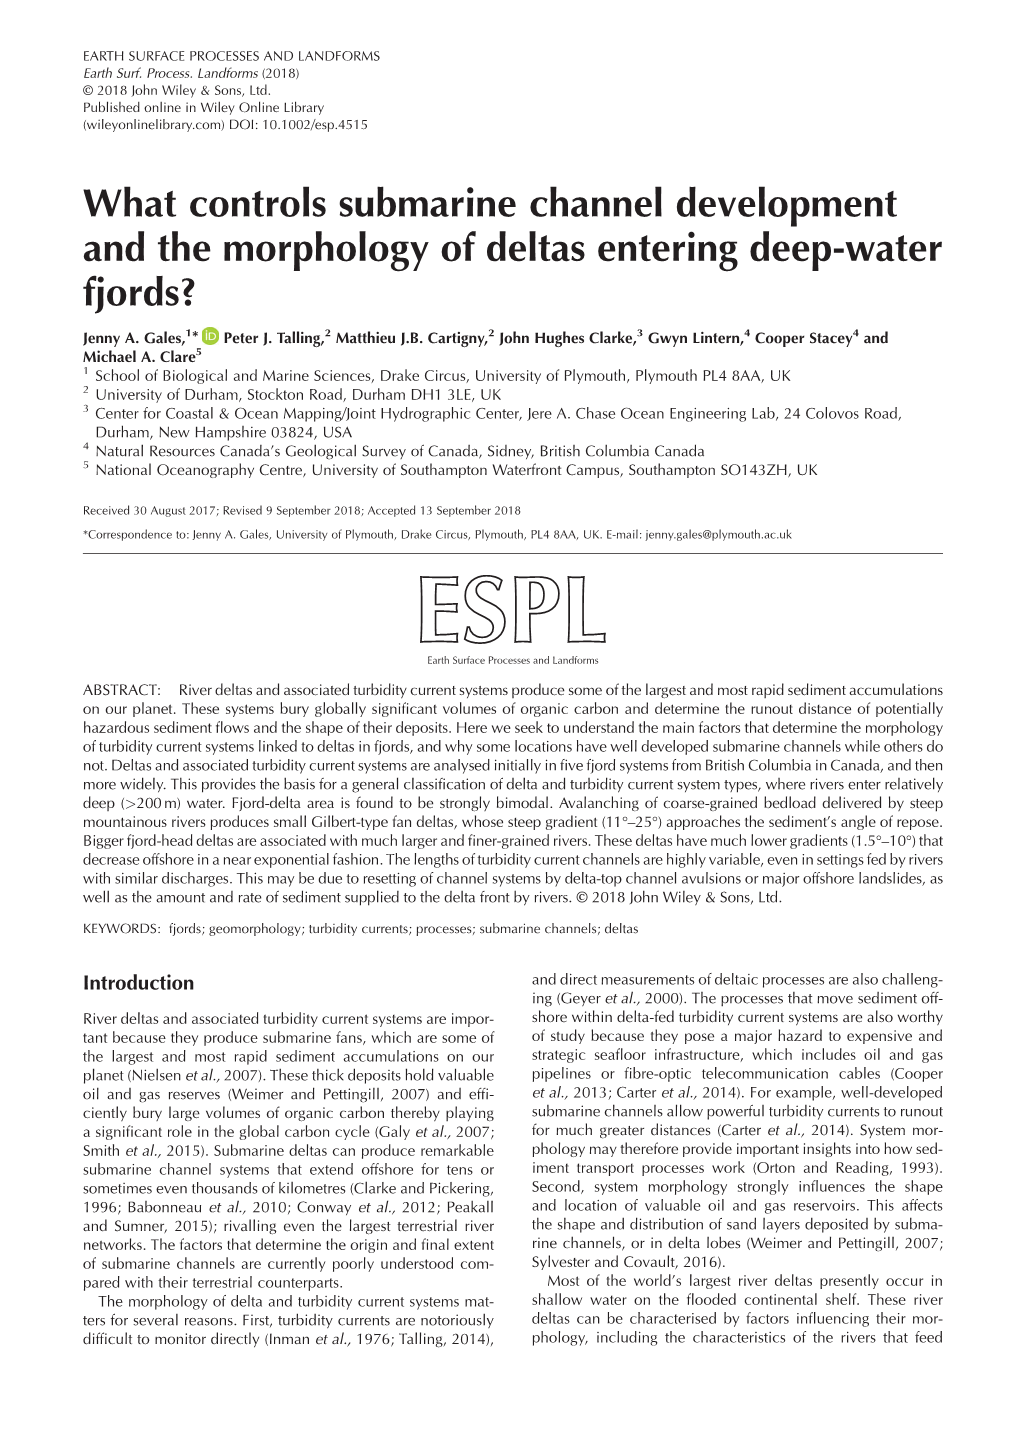 What Controls Submarine Channel Development and the Morphology of Deltas Entering Deep-Water Fjords?